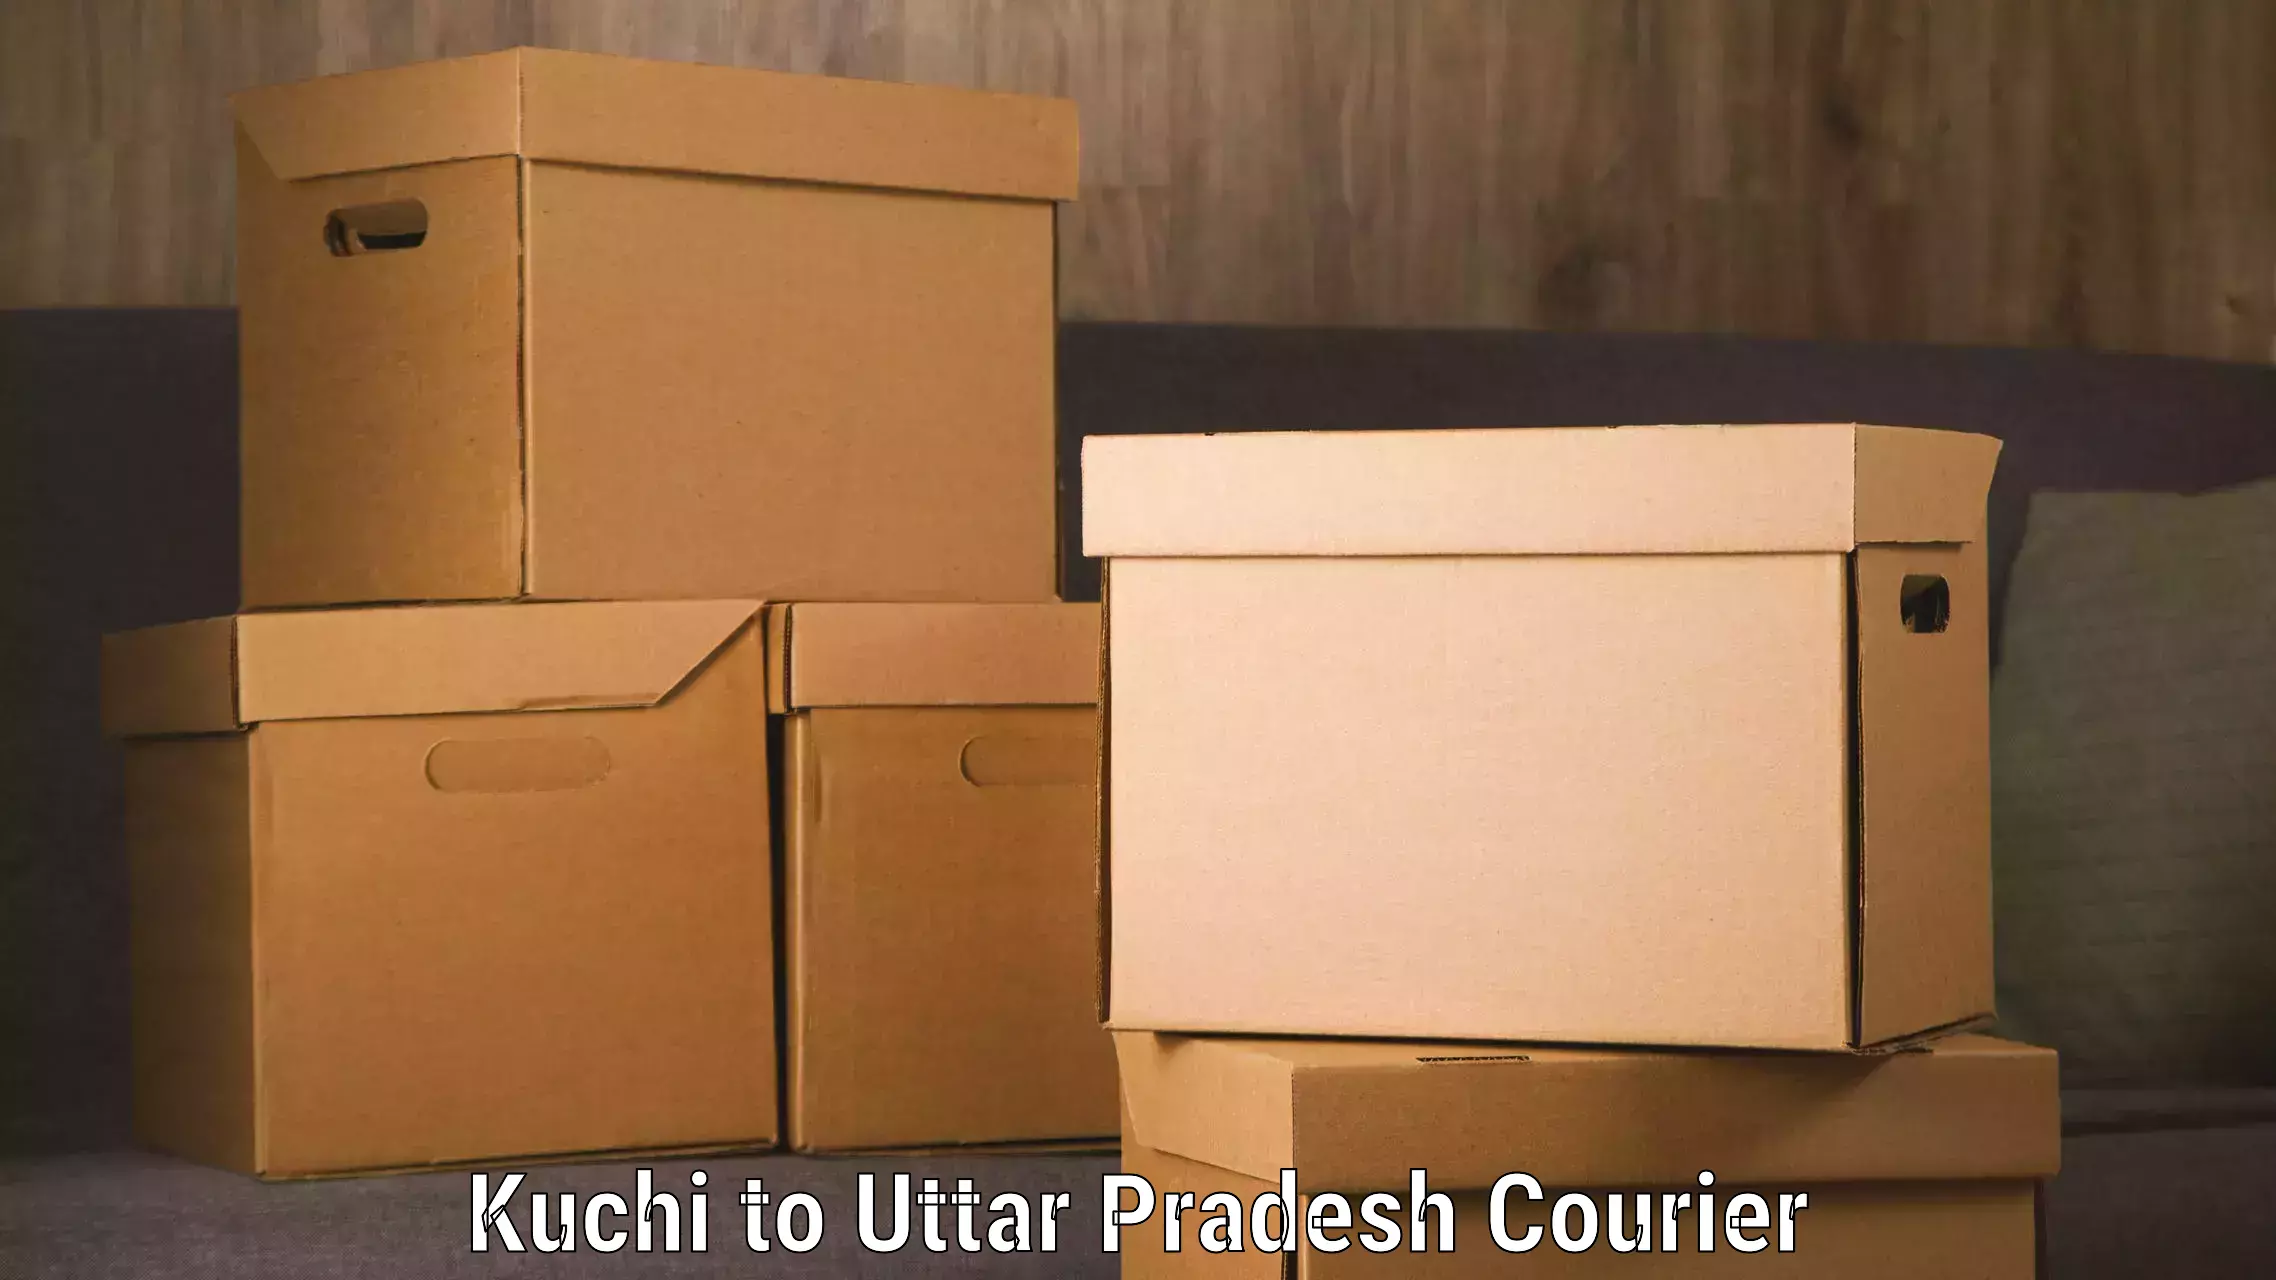 Enhanced tracking features Kuchi to Rampur